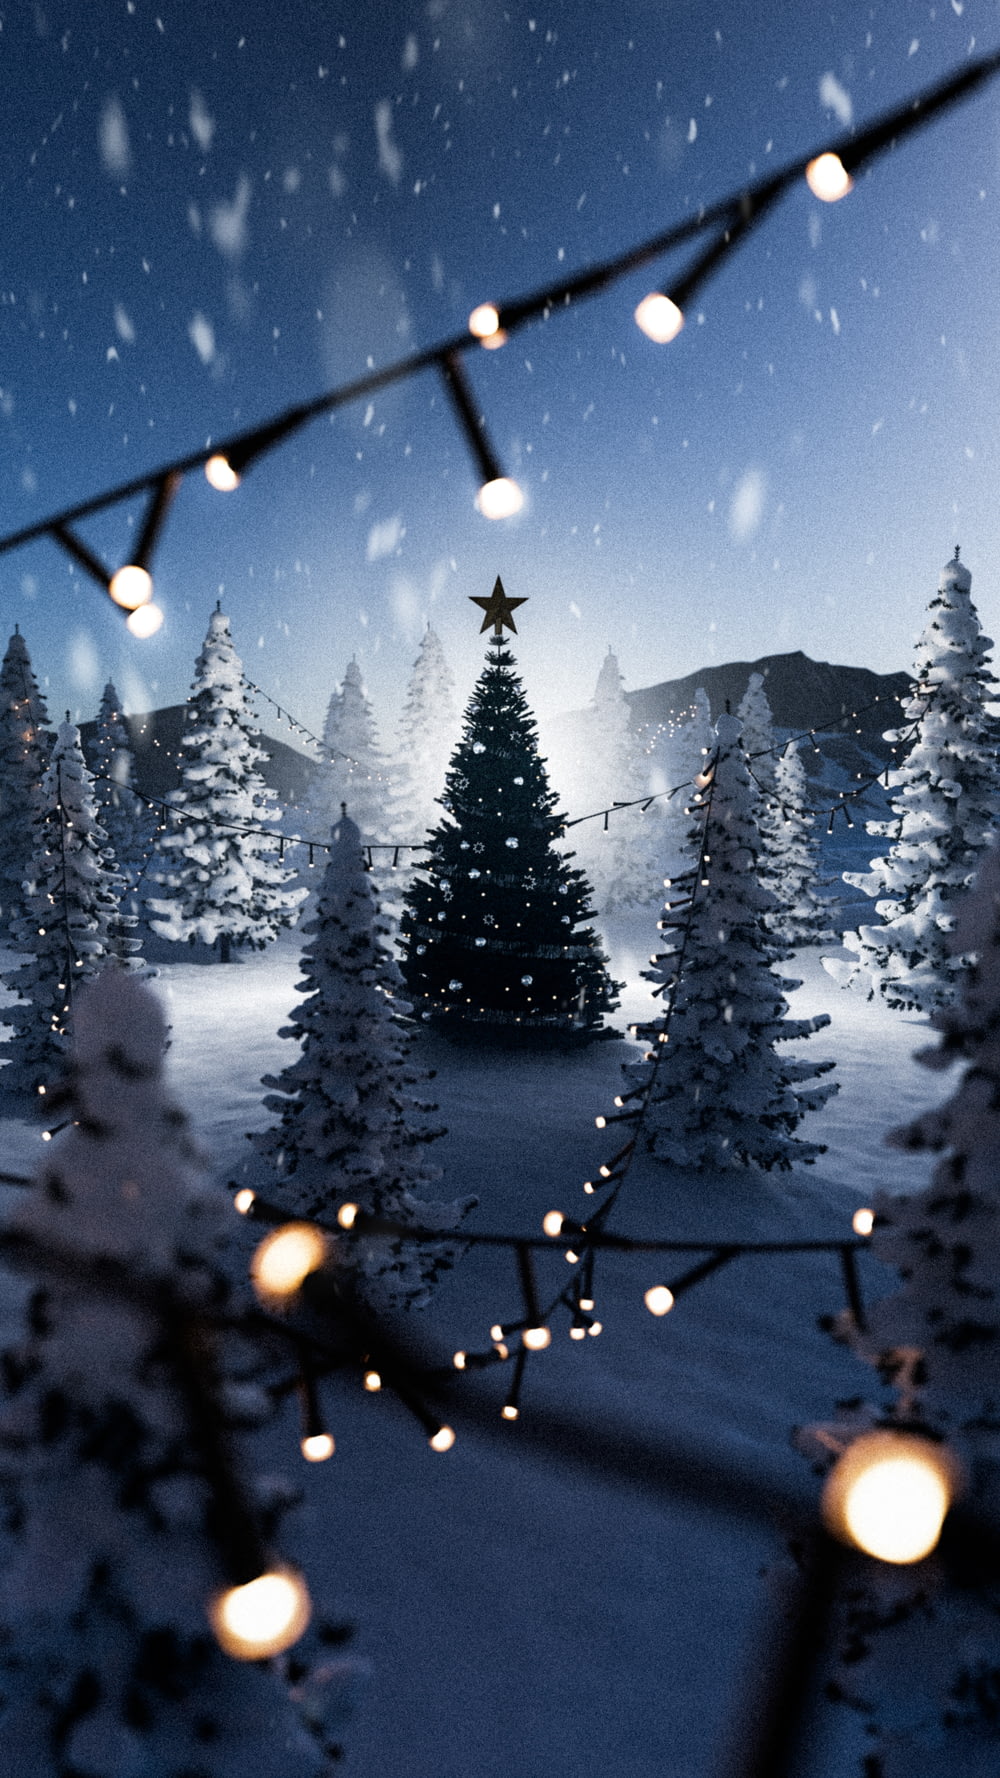 a snowy landscape with christmas trees and lights